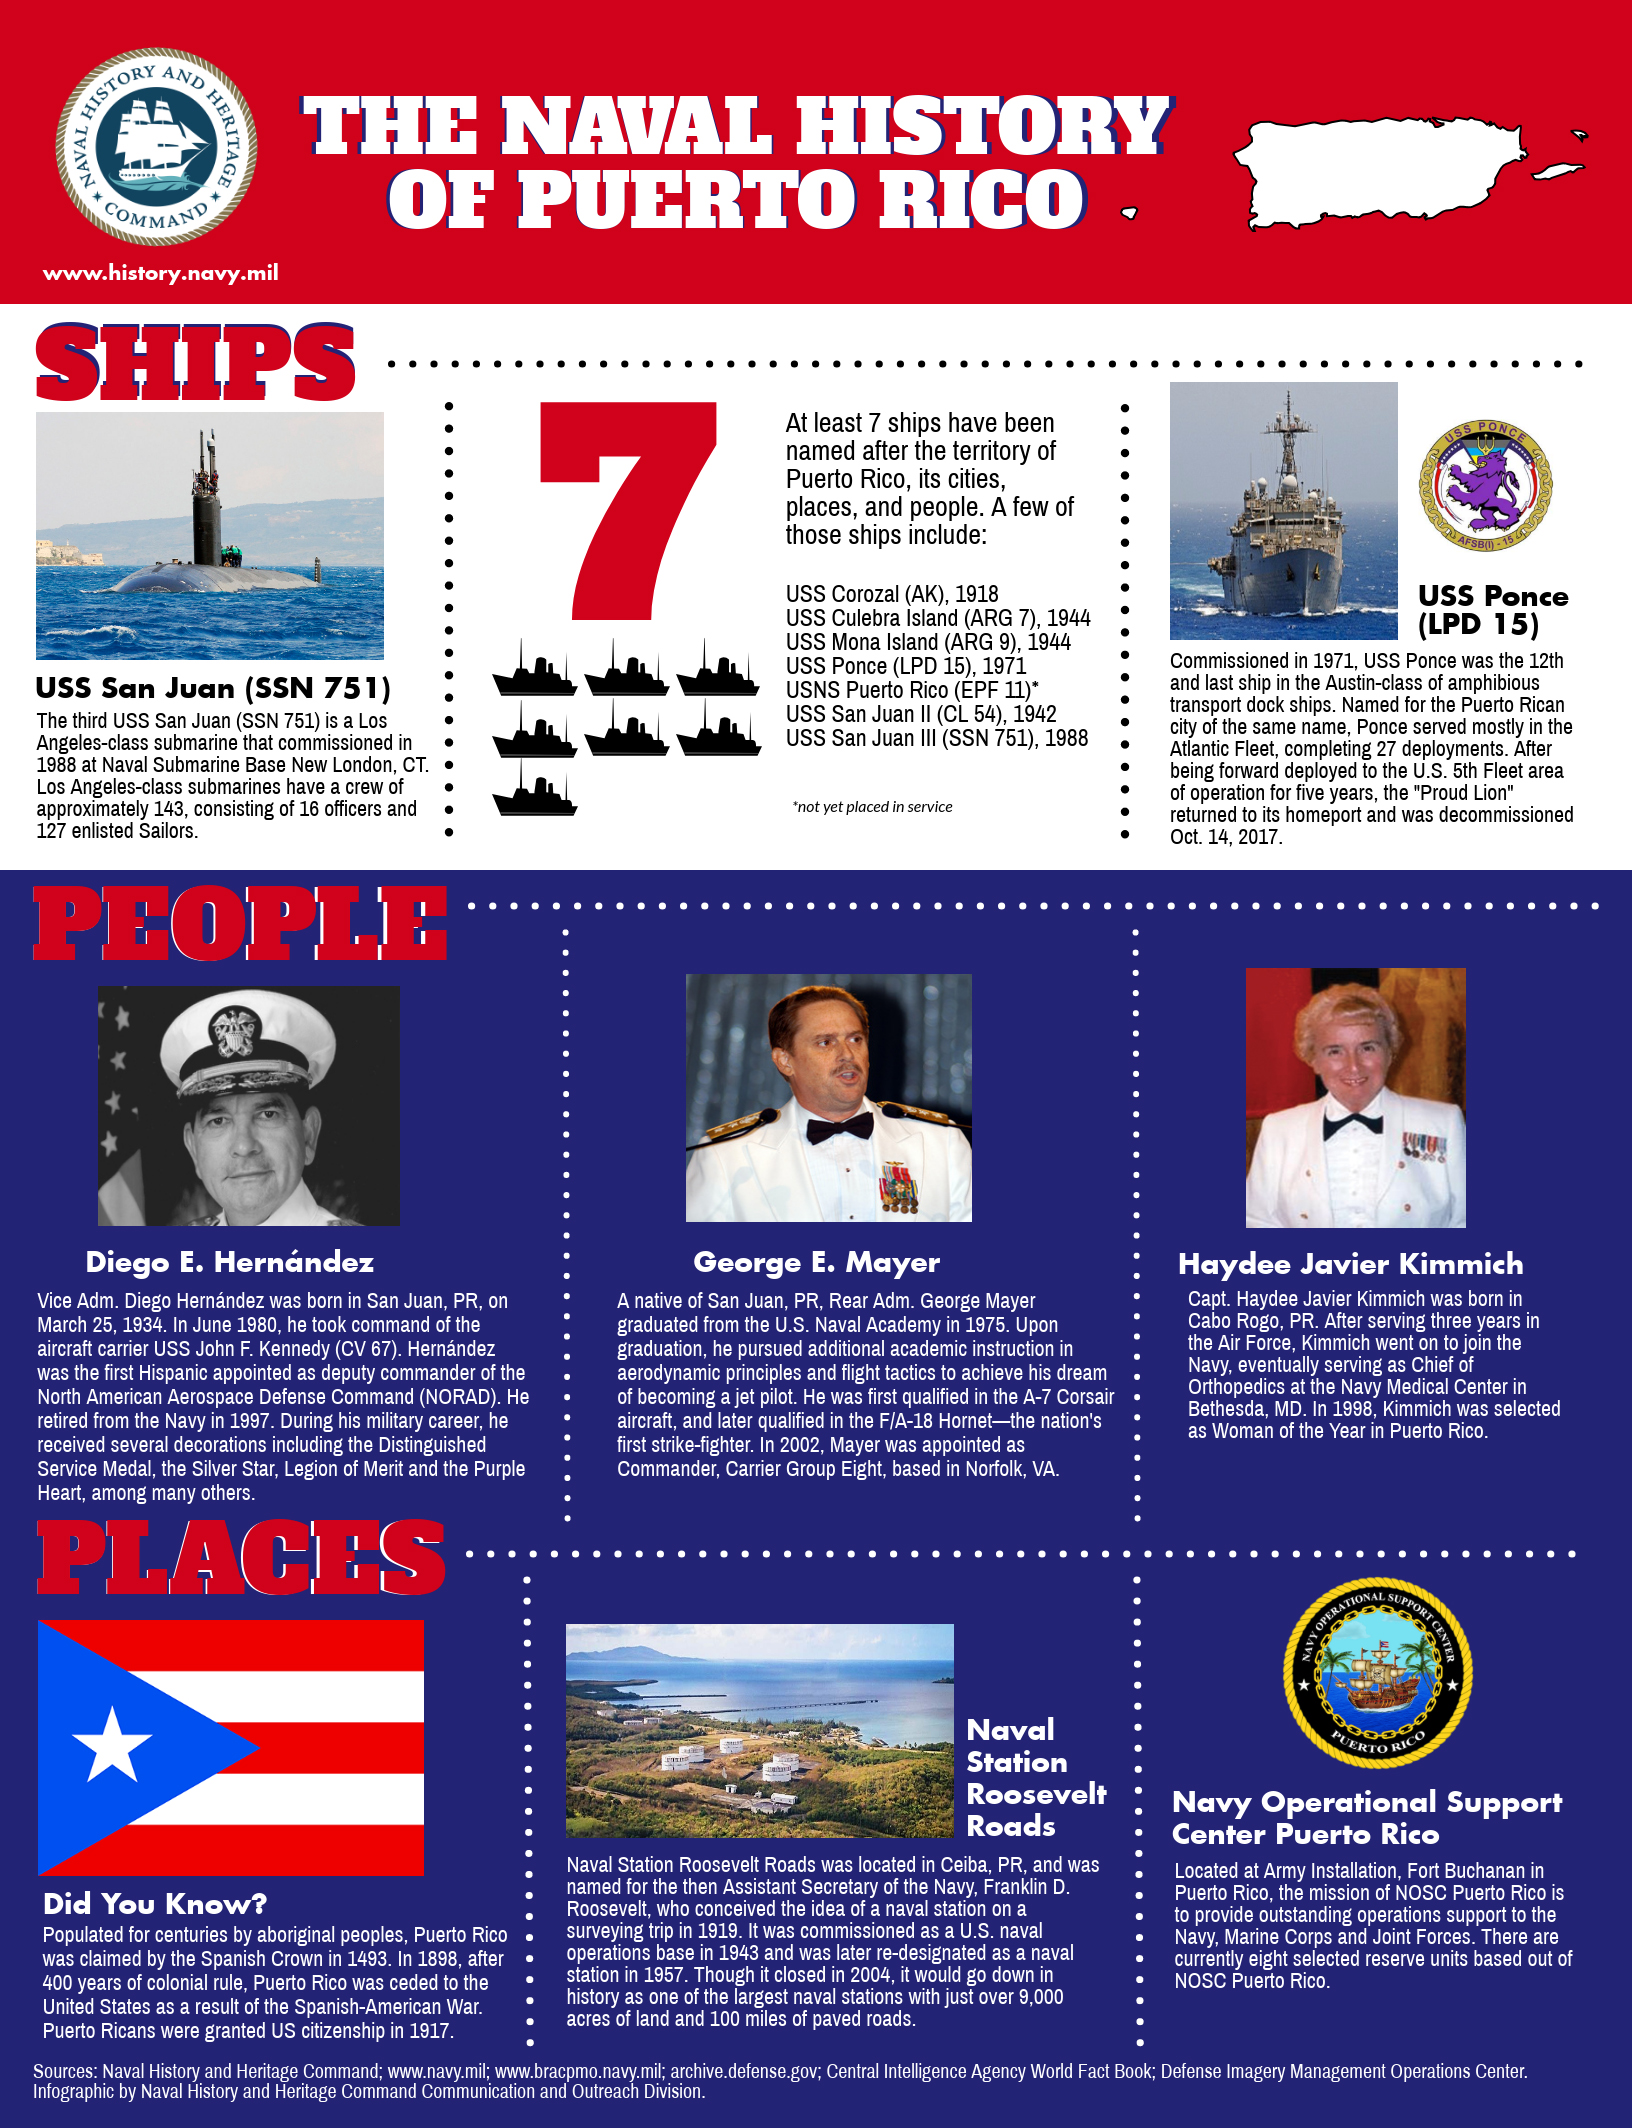 https://www.history.navy.mil/content/dam/nhhc/news-and-events/multimedia%20gallery/Infographics/FINAL_NavyWeekPuertoRico_highres_JPEG.jpg